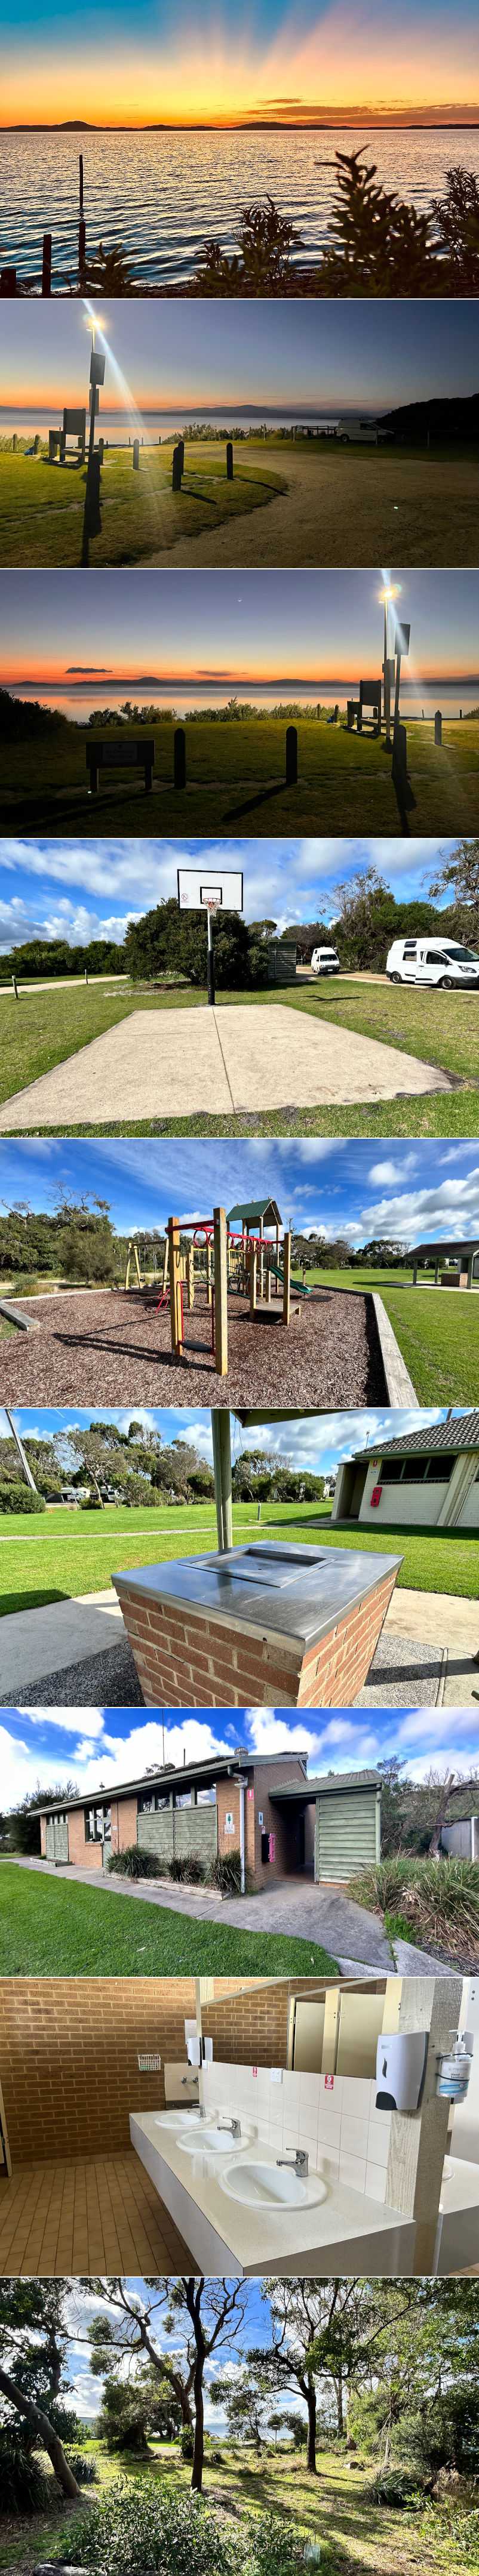 Wilsons Prom Holiday Park - Grounds and facilities